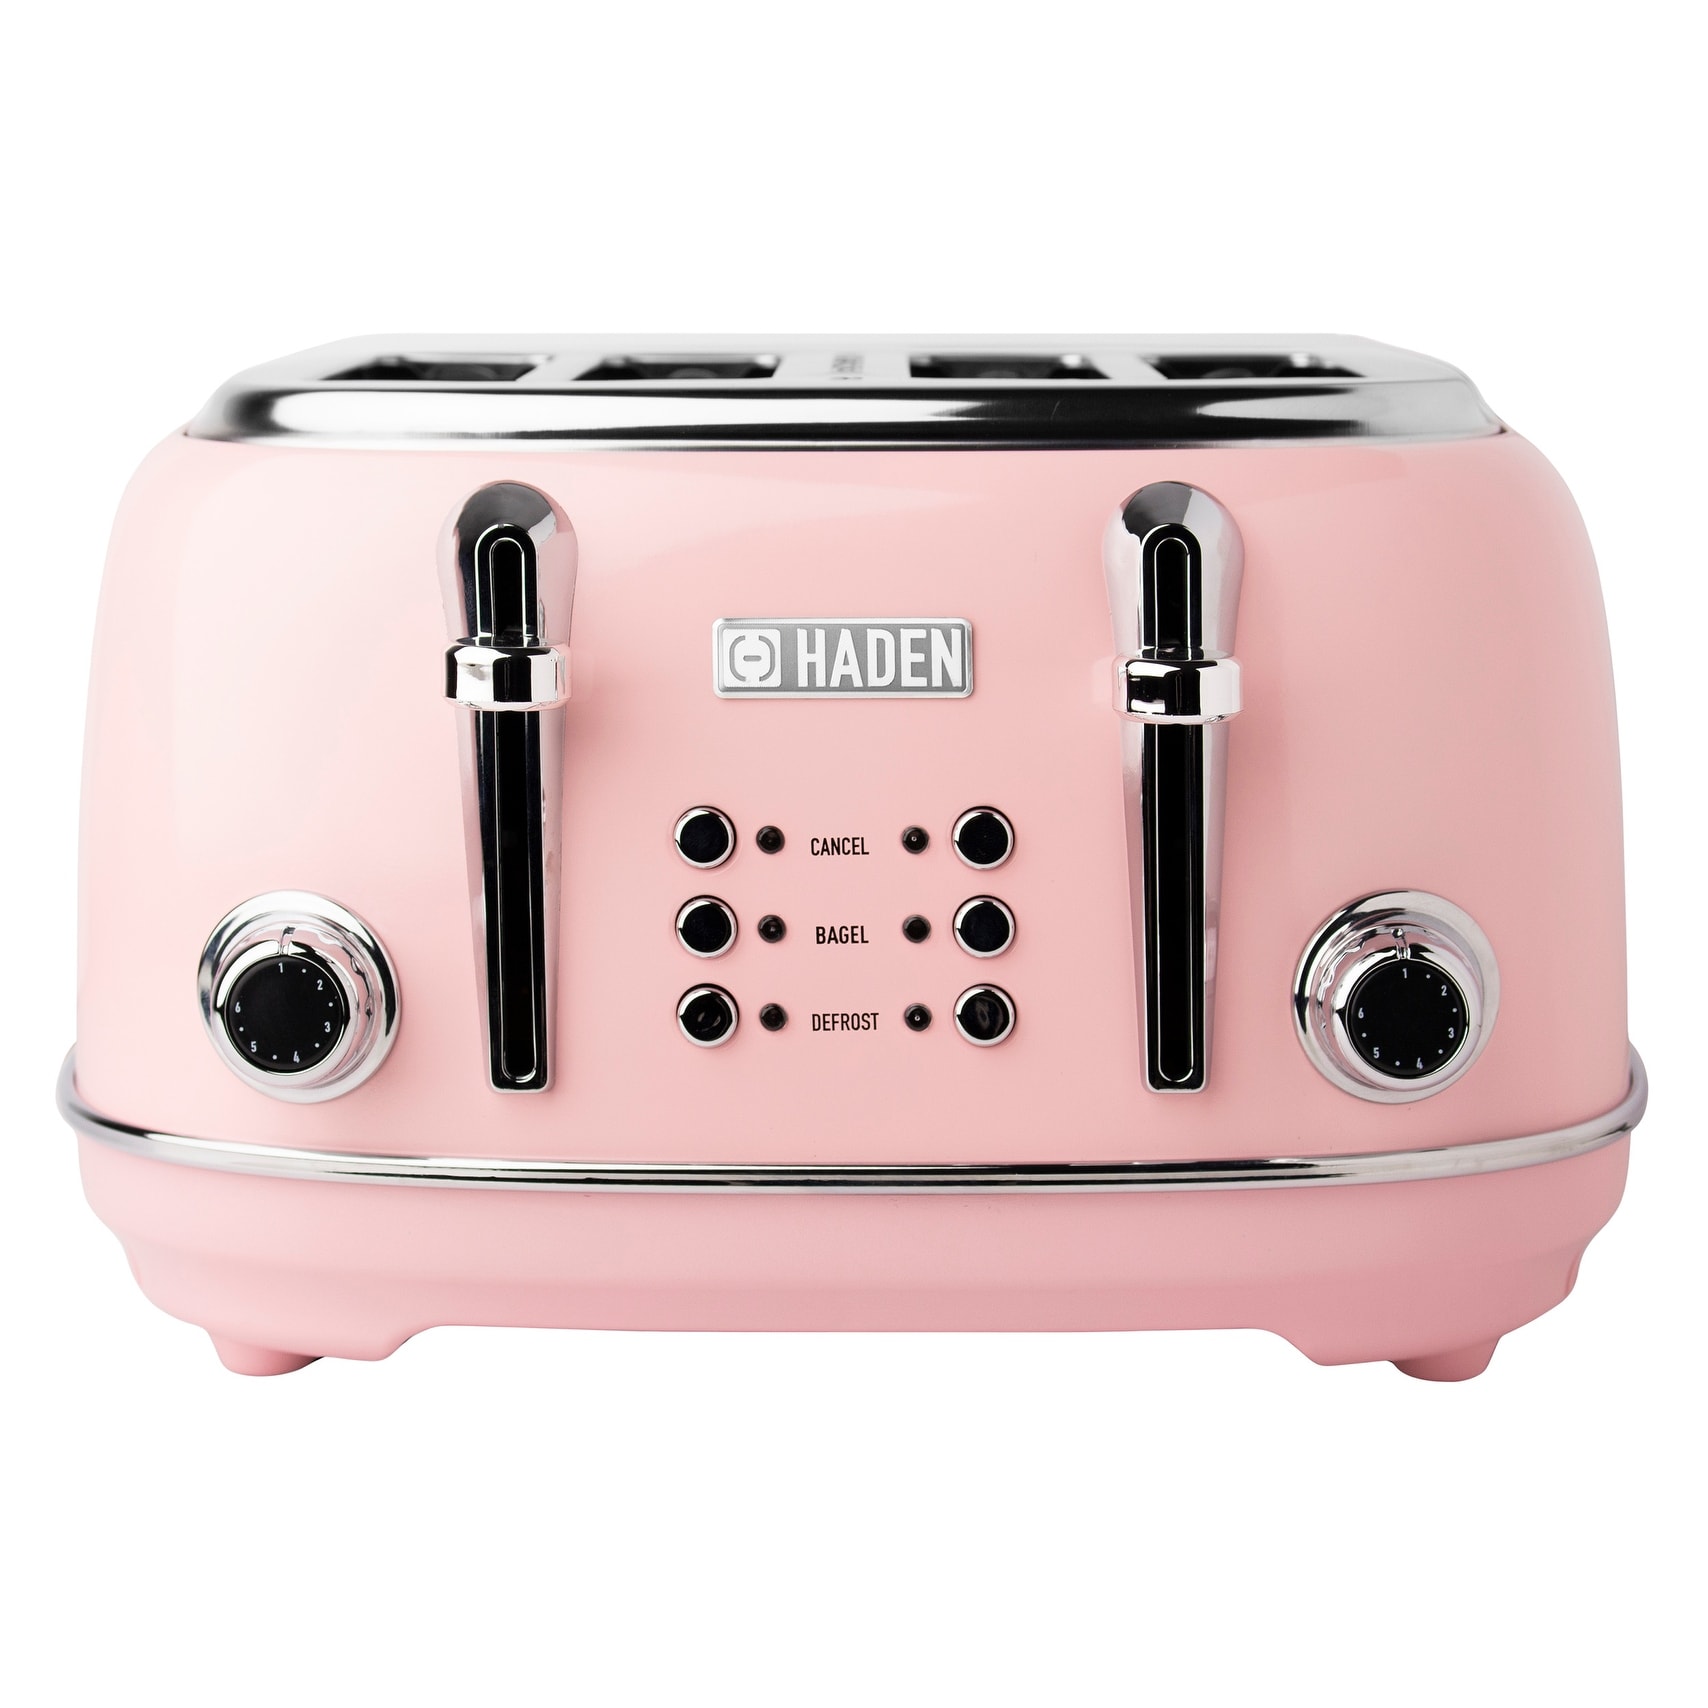 https://ak1.ostkcdn.com/images/products/is/images/direct/0d780f9ddb71778f0e98e8b33227735128ea9fcd/Haden-Heritage-Retro-Wide-Slot-4-slice-Toaster.jpg